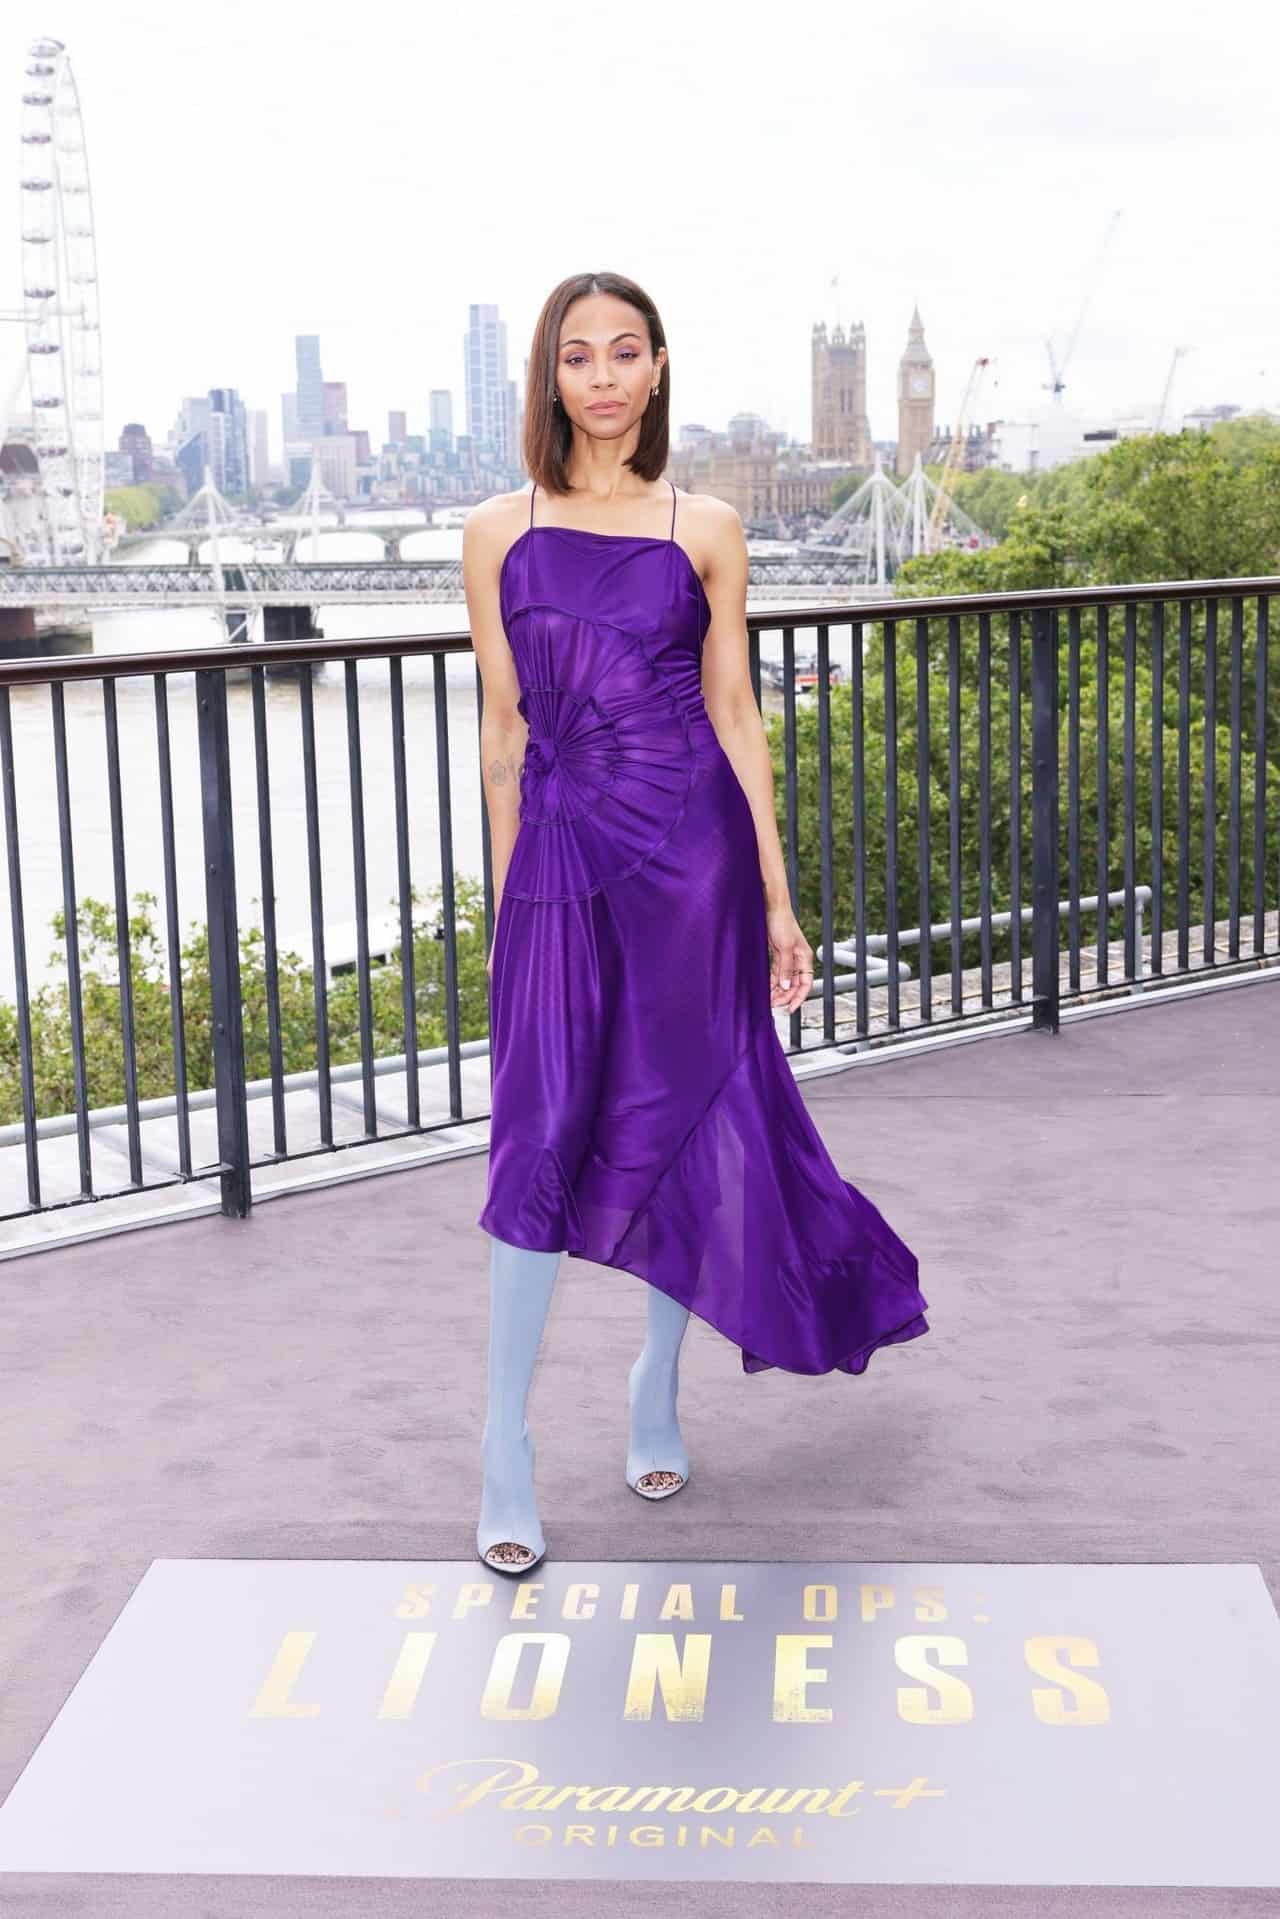 Zoe Saldana Attends Photocall for "Special Ops: Lioness" in London